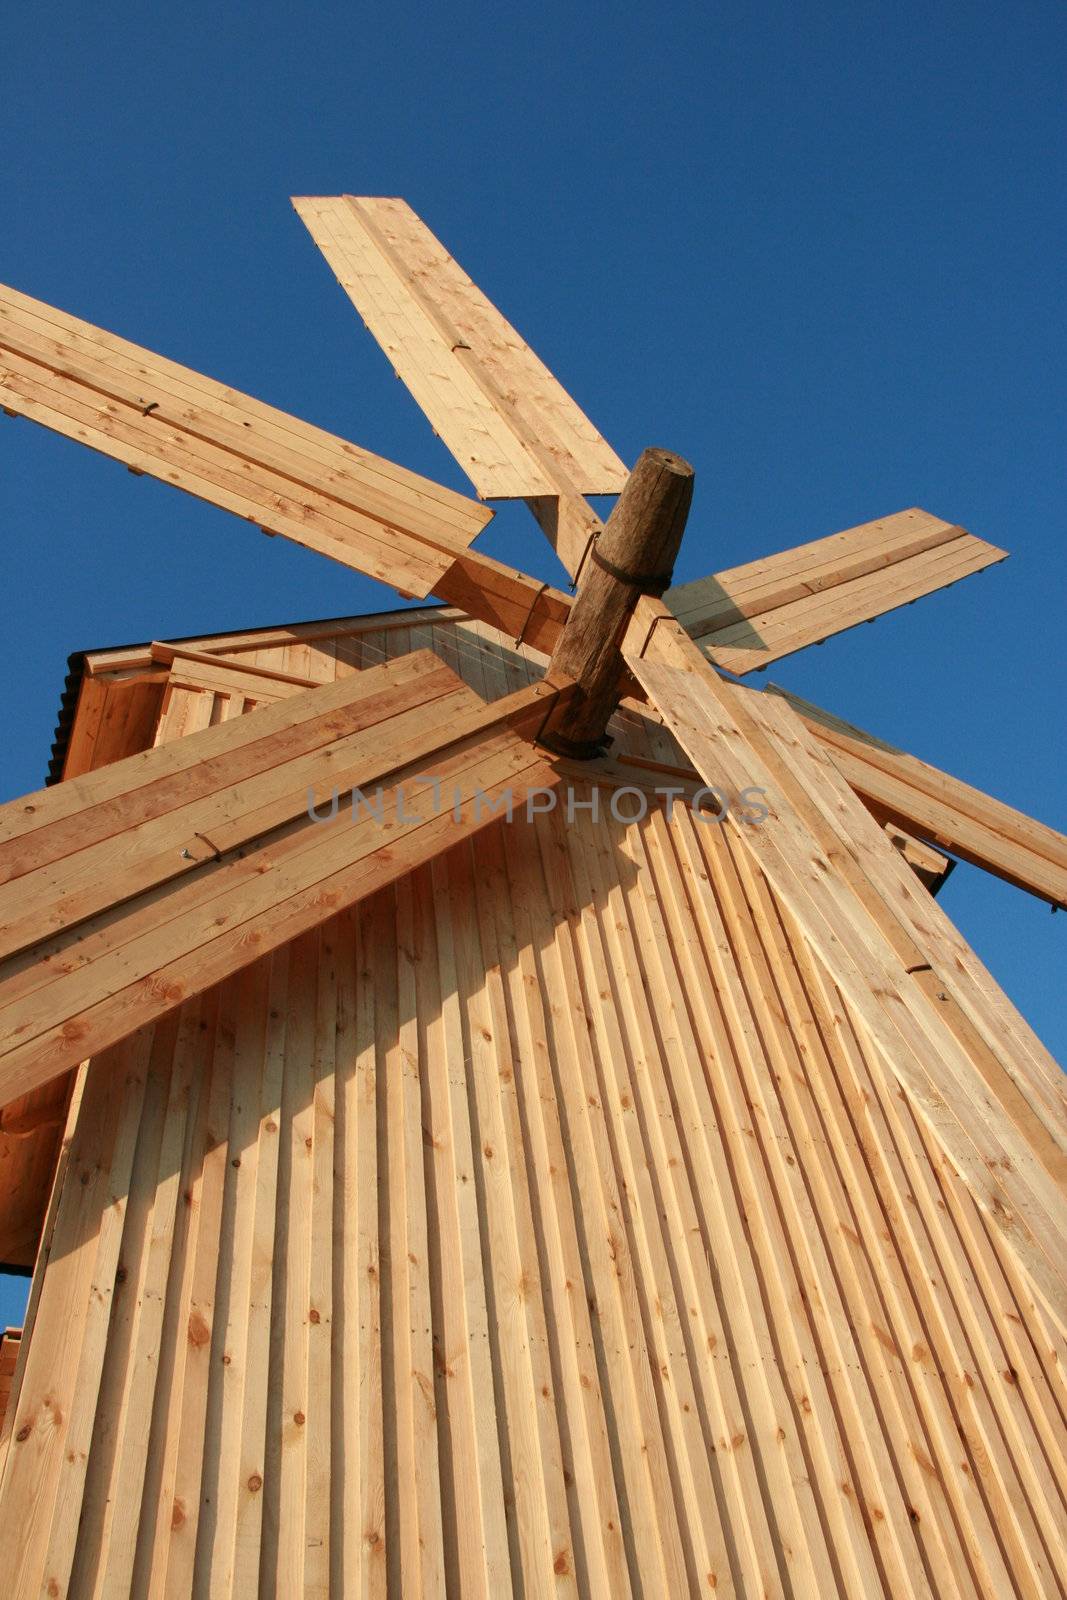 wooden windmill against blue sky by fotosergio